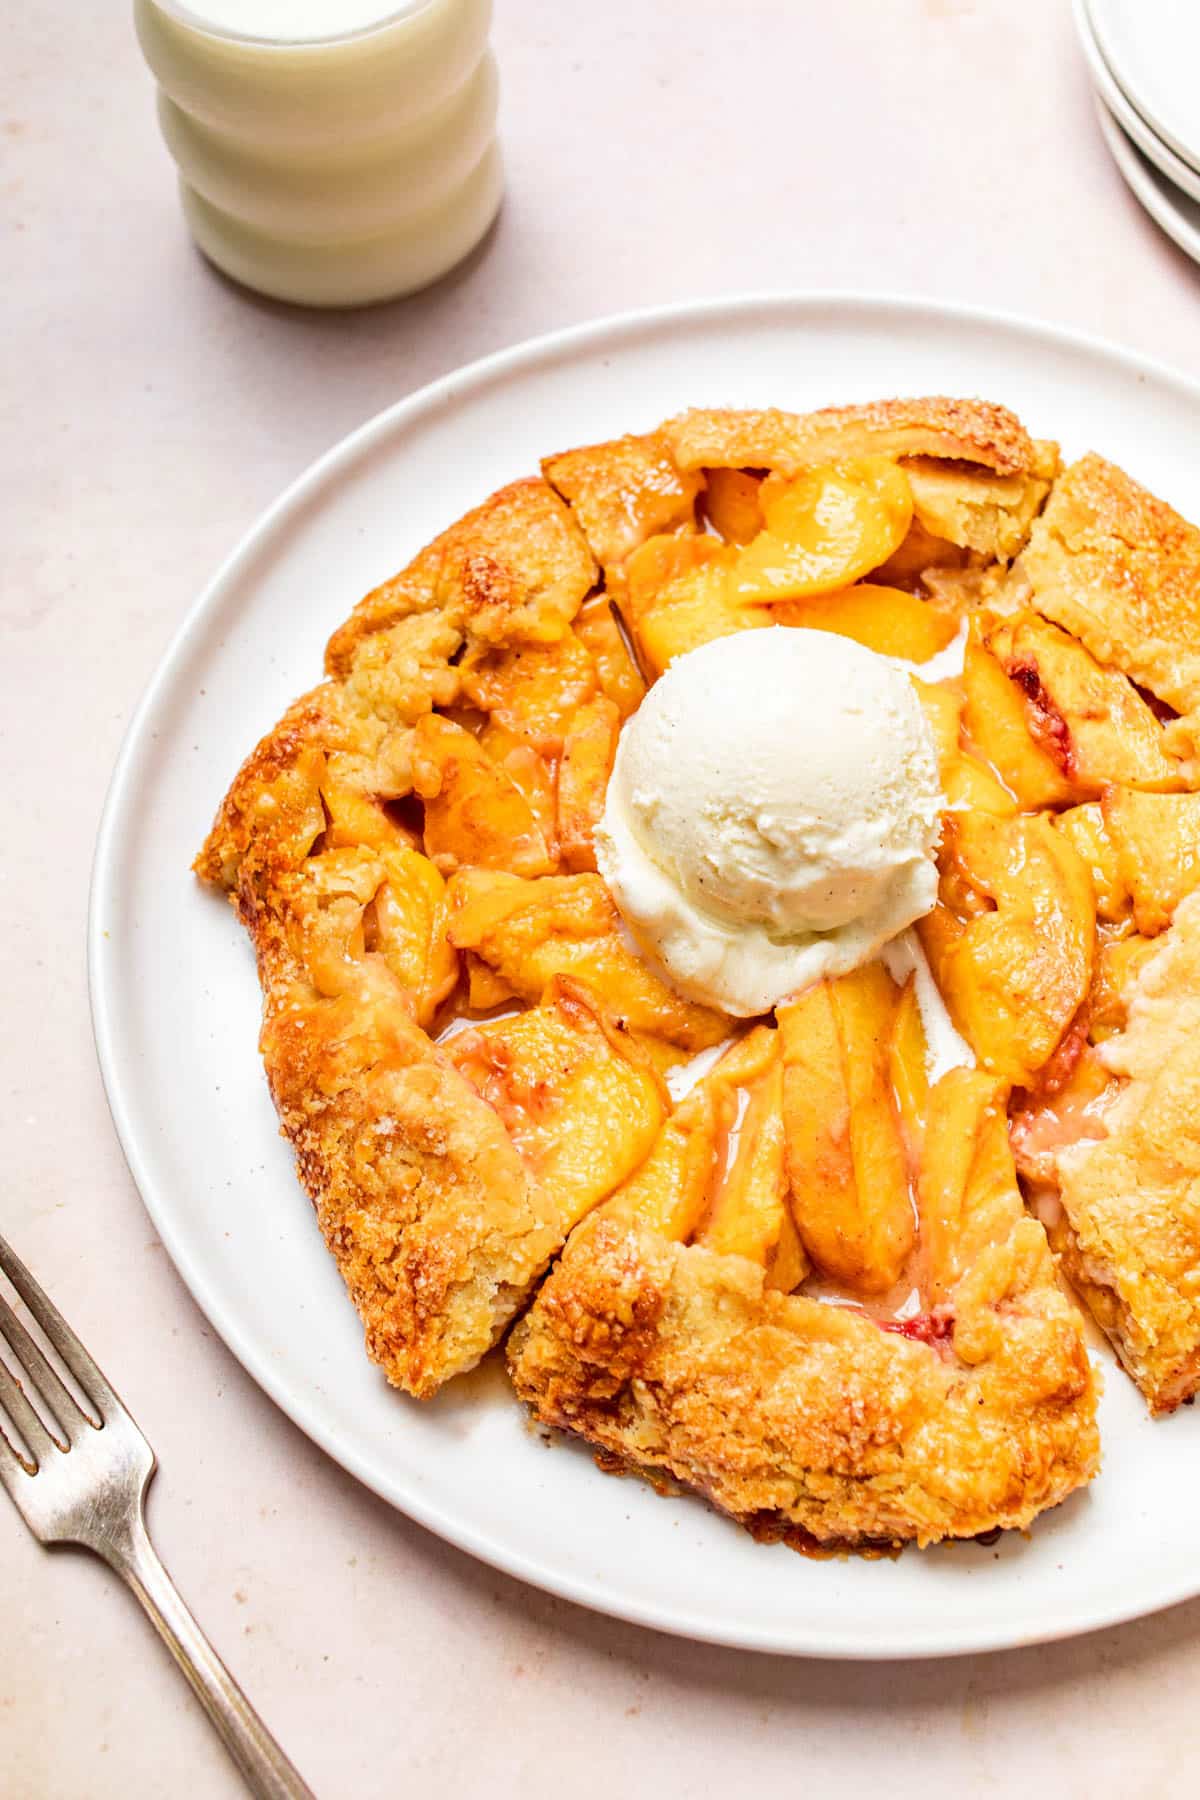 Peach galette on a serving plate with a scoop of ice cream on top.